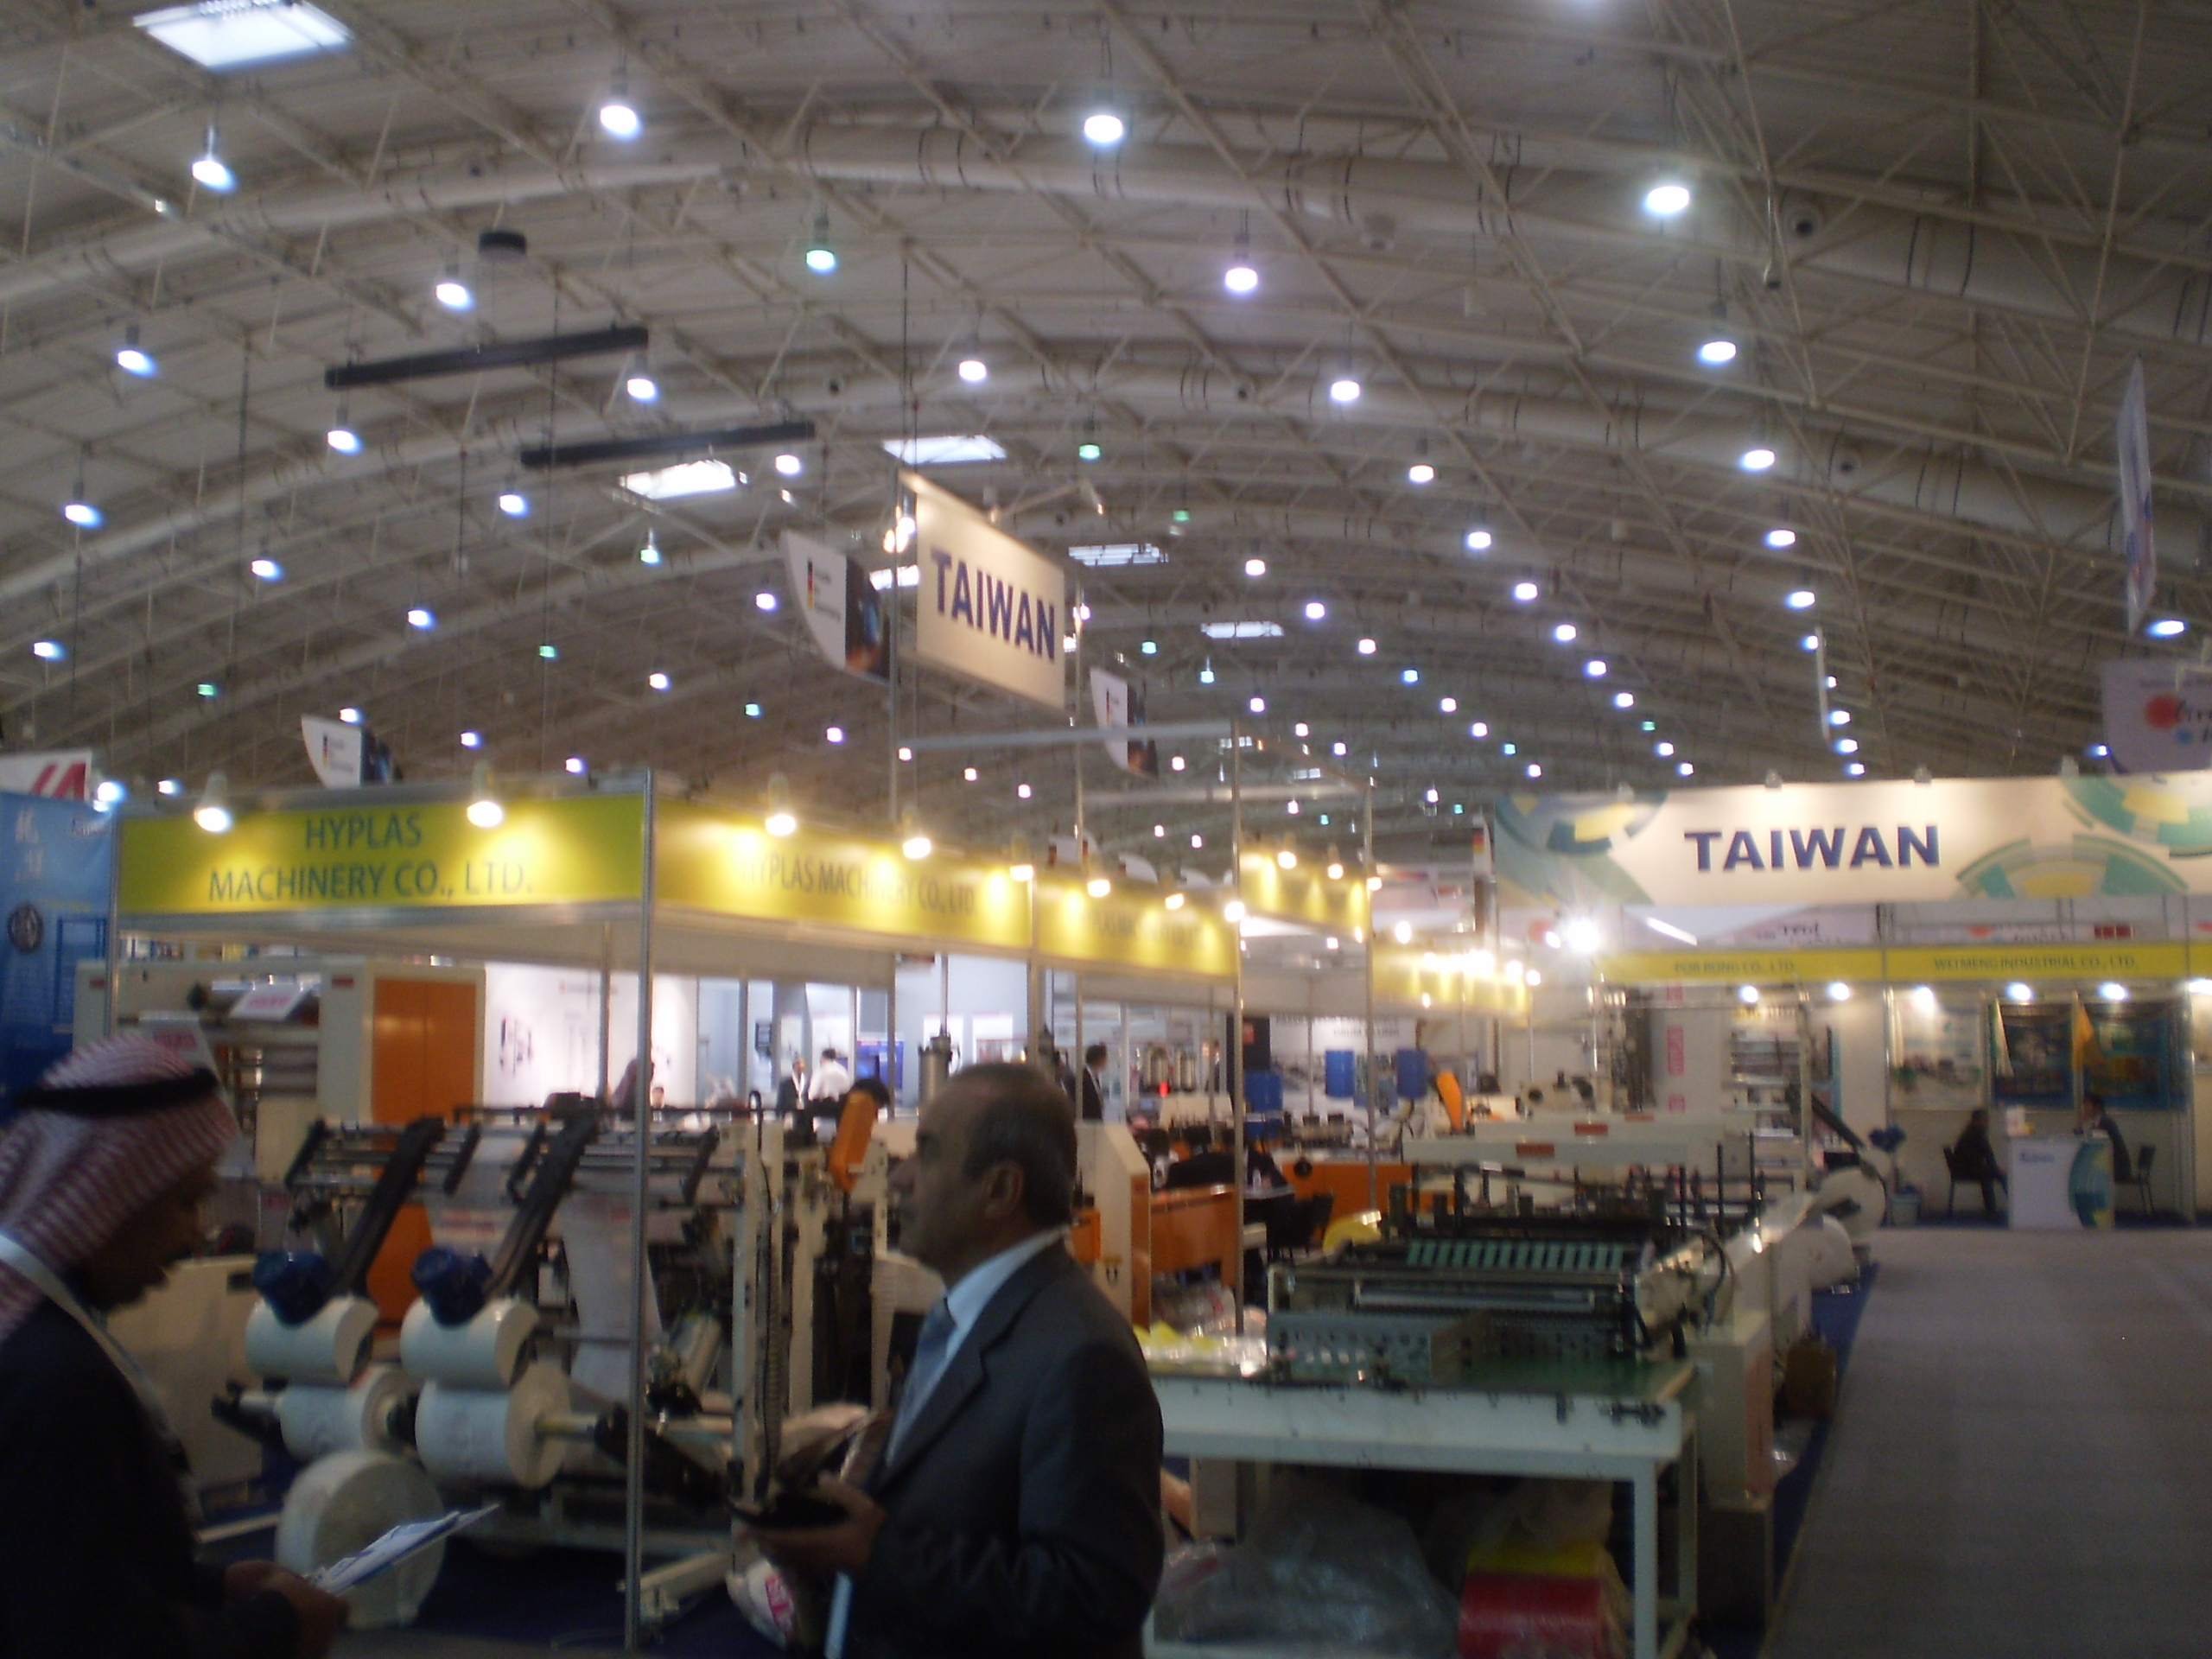 Hyplas demonstrated several bag making lines at a large booth during Saudi PPPP 2014.